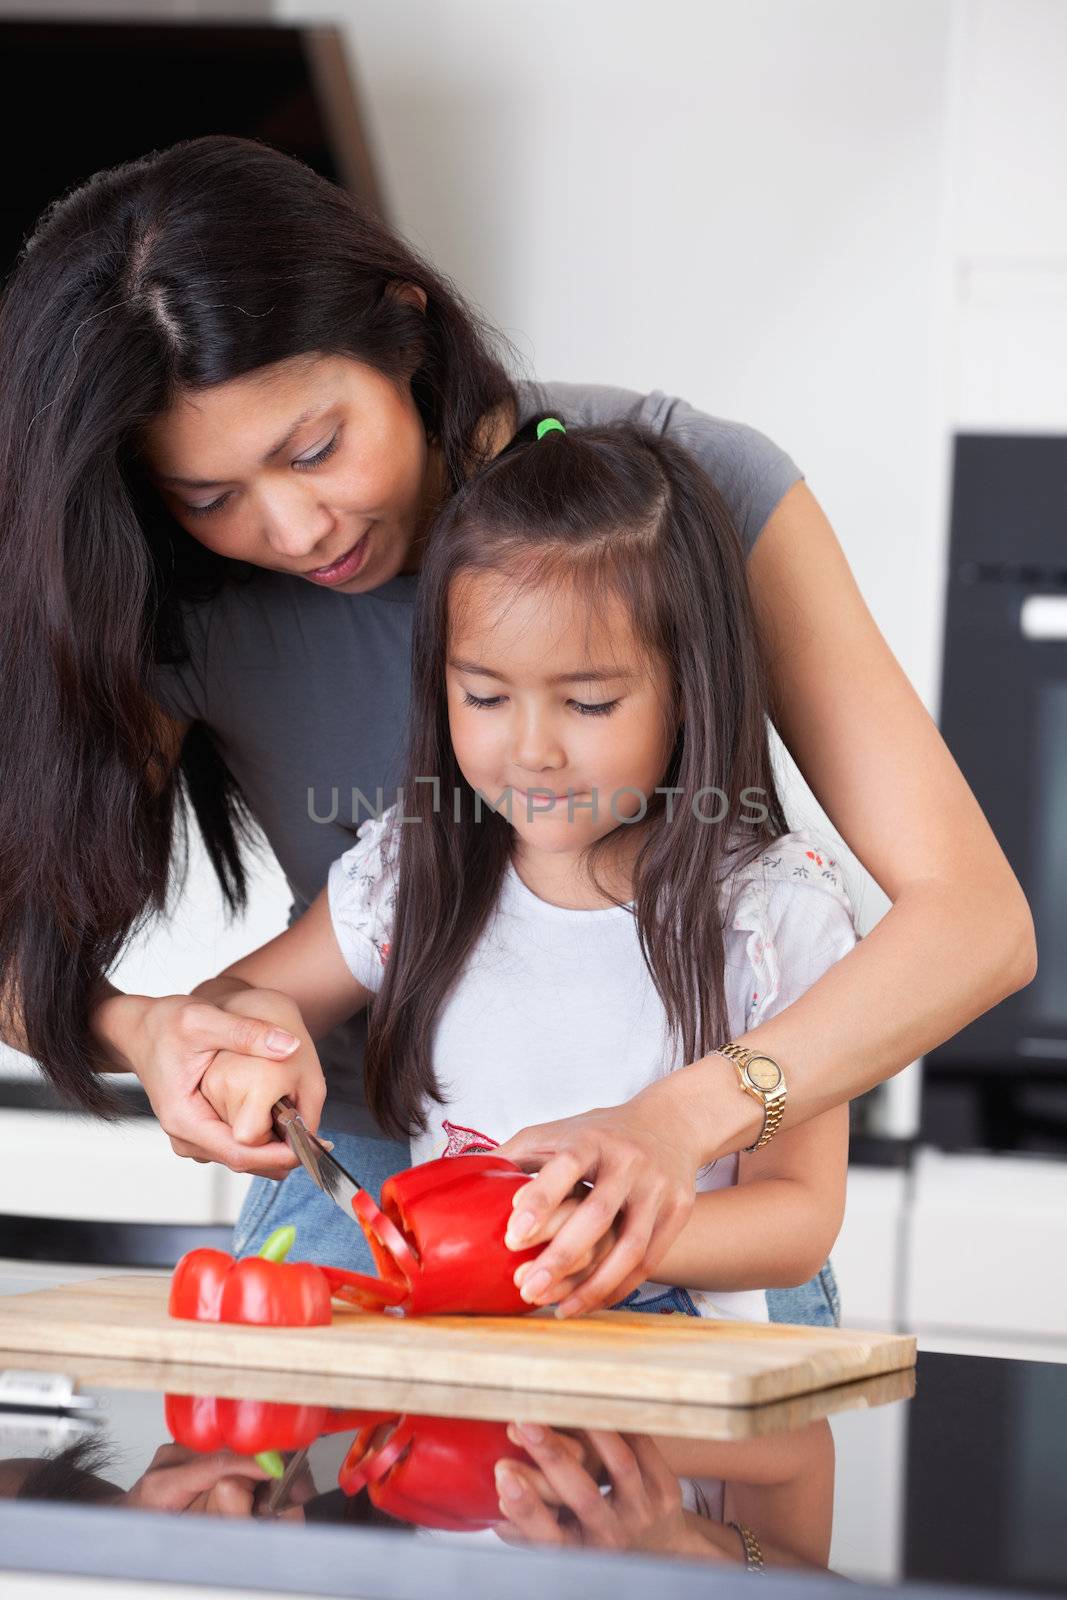 Little girl cutting pepper with the help of her mother